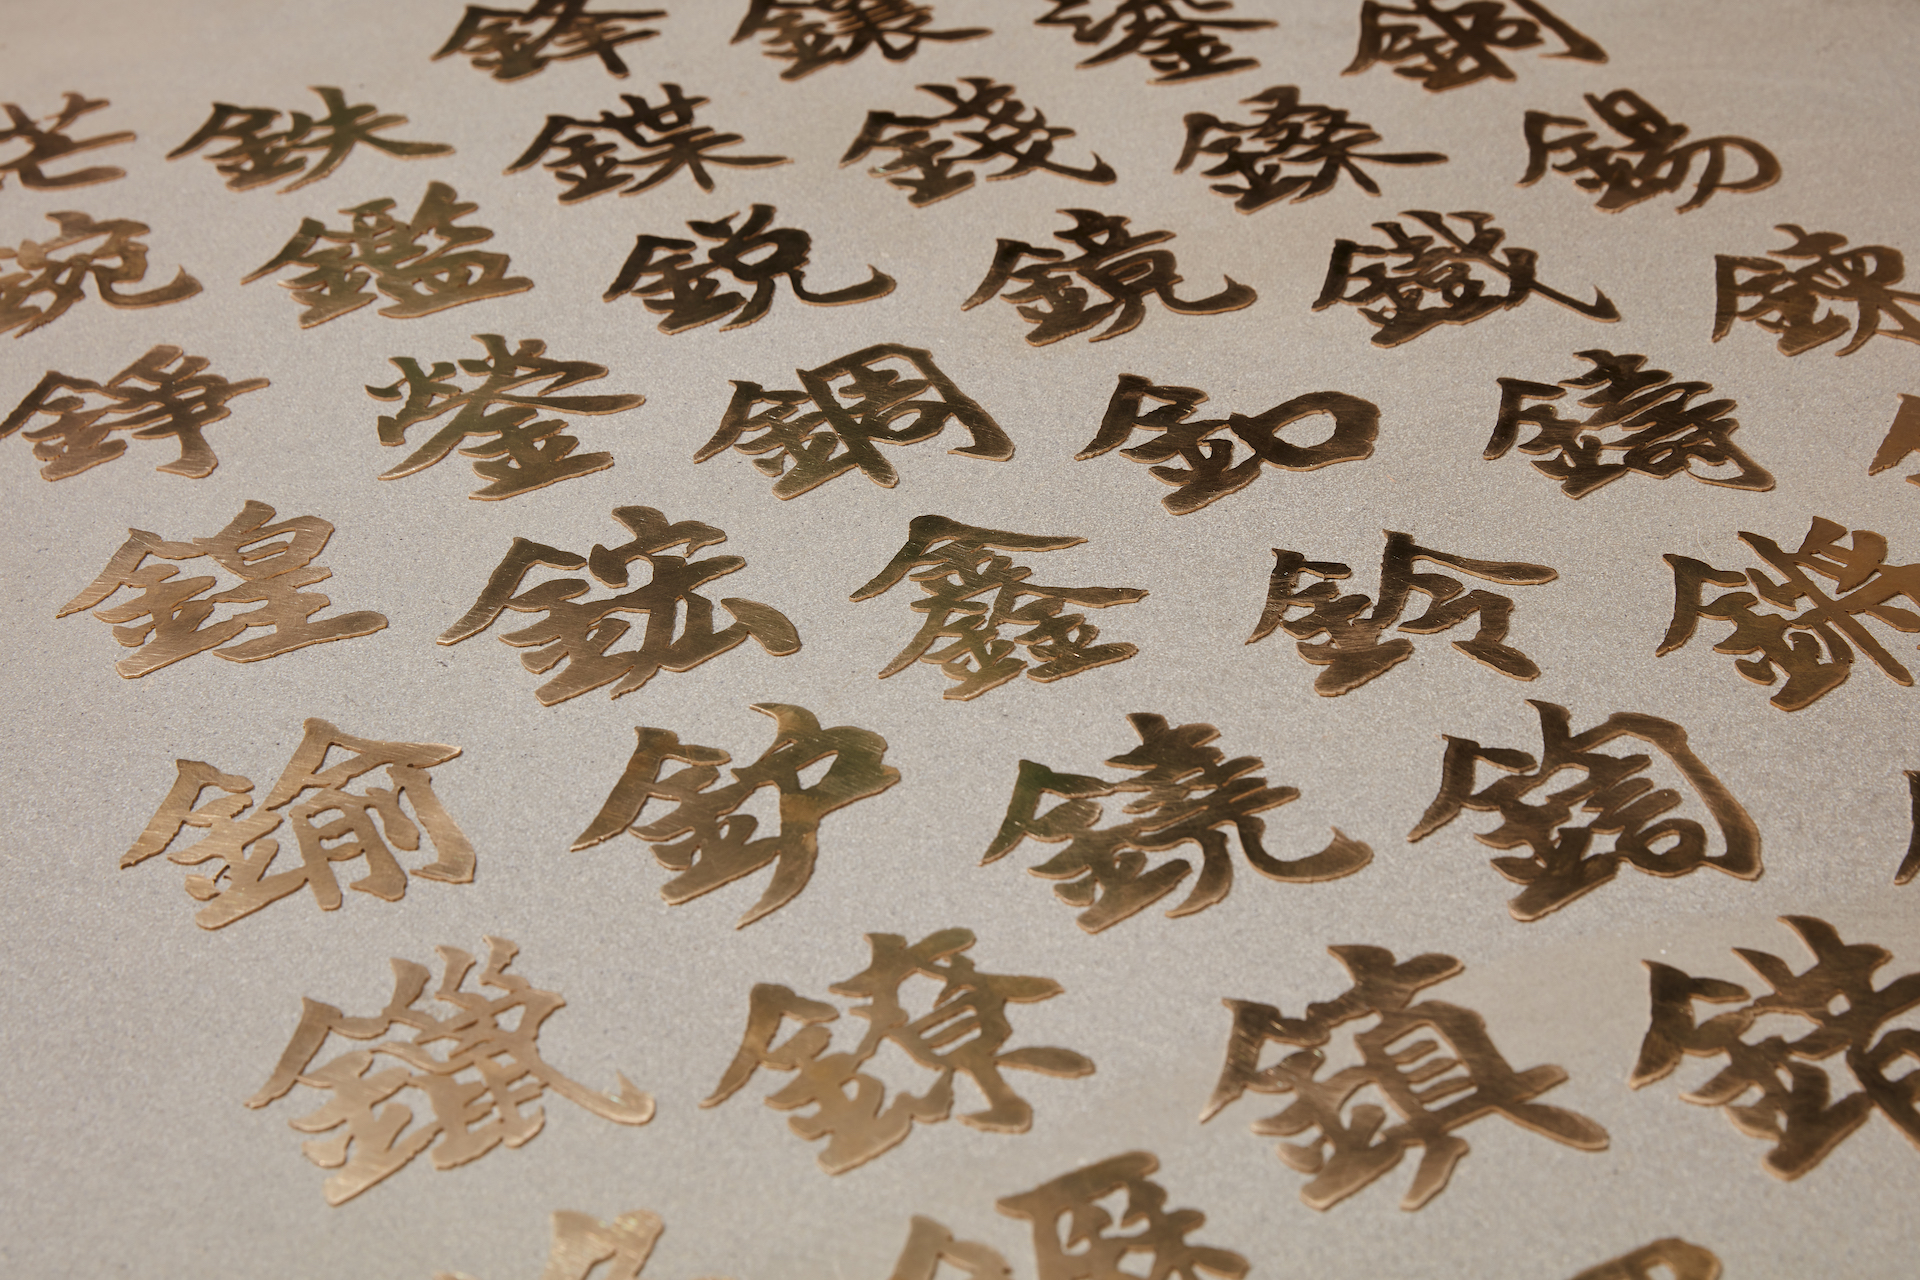 Craft-ligraphy by Master Fung Siu Wah (War Gor) with metalwork by contemporary artisans Nathan Wong and Hazel Lee